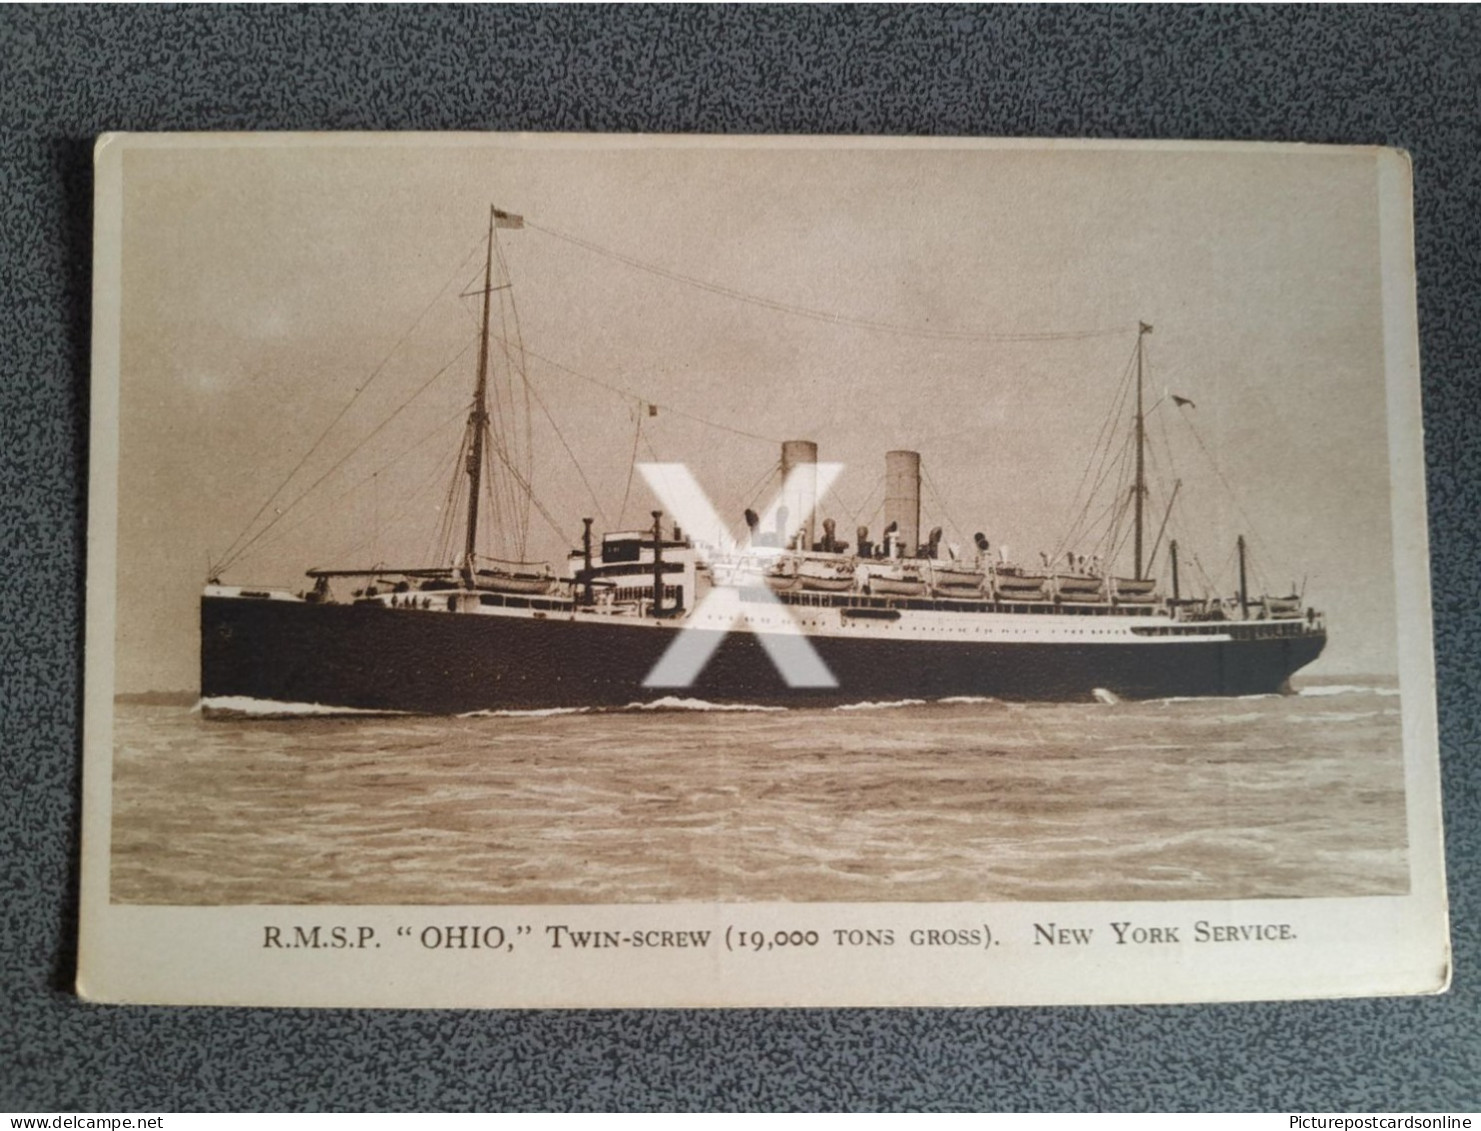 ROYAL MAIL STEAM PACKET OHIO OLD B/W POSTCARD STEAMER SHIPPING NEW YORK SERVICE RMSP AGENT HOSPITAL STREET PERTH - Steamers